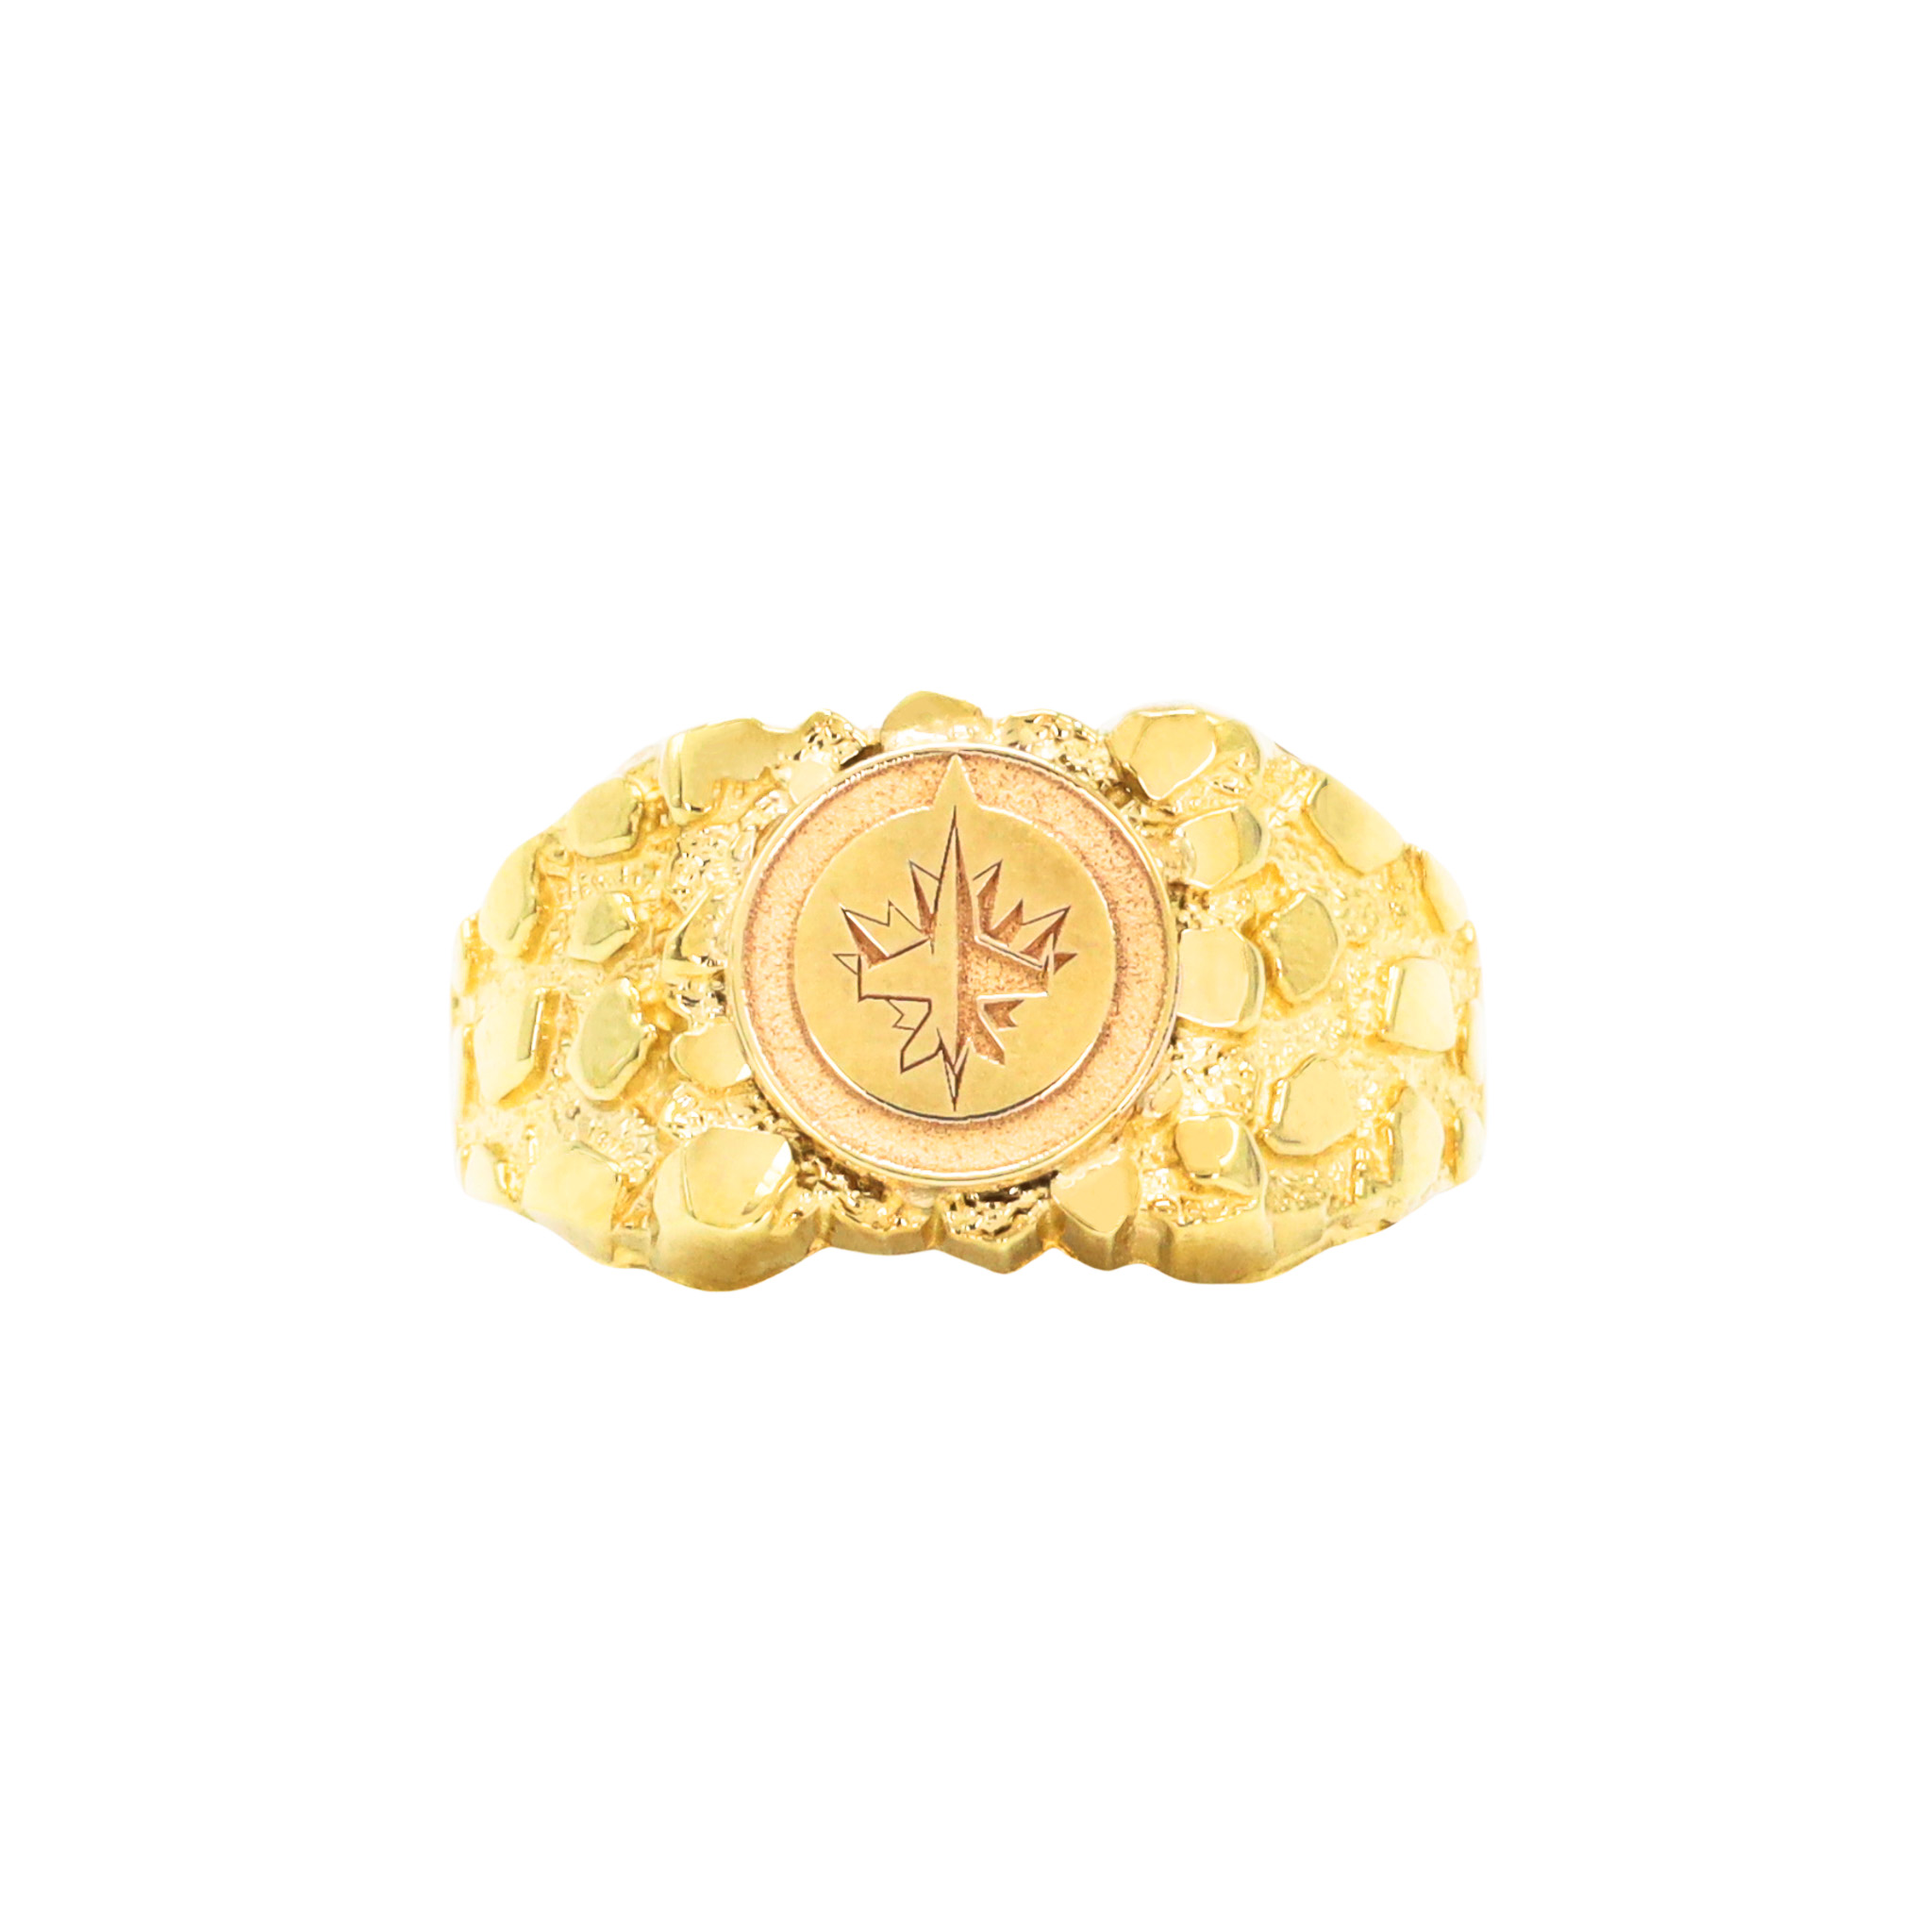 Jets Nugget - Nugget Ring - Golden Hand Jewellery